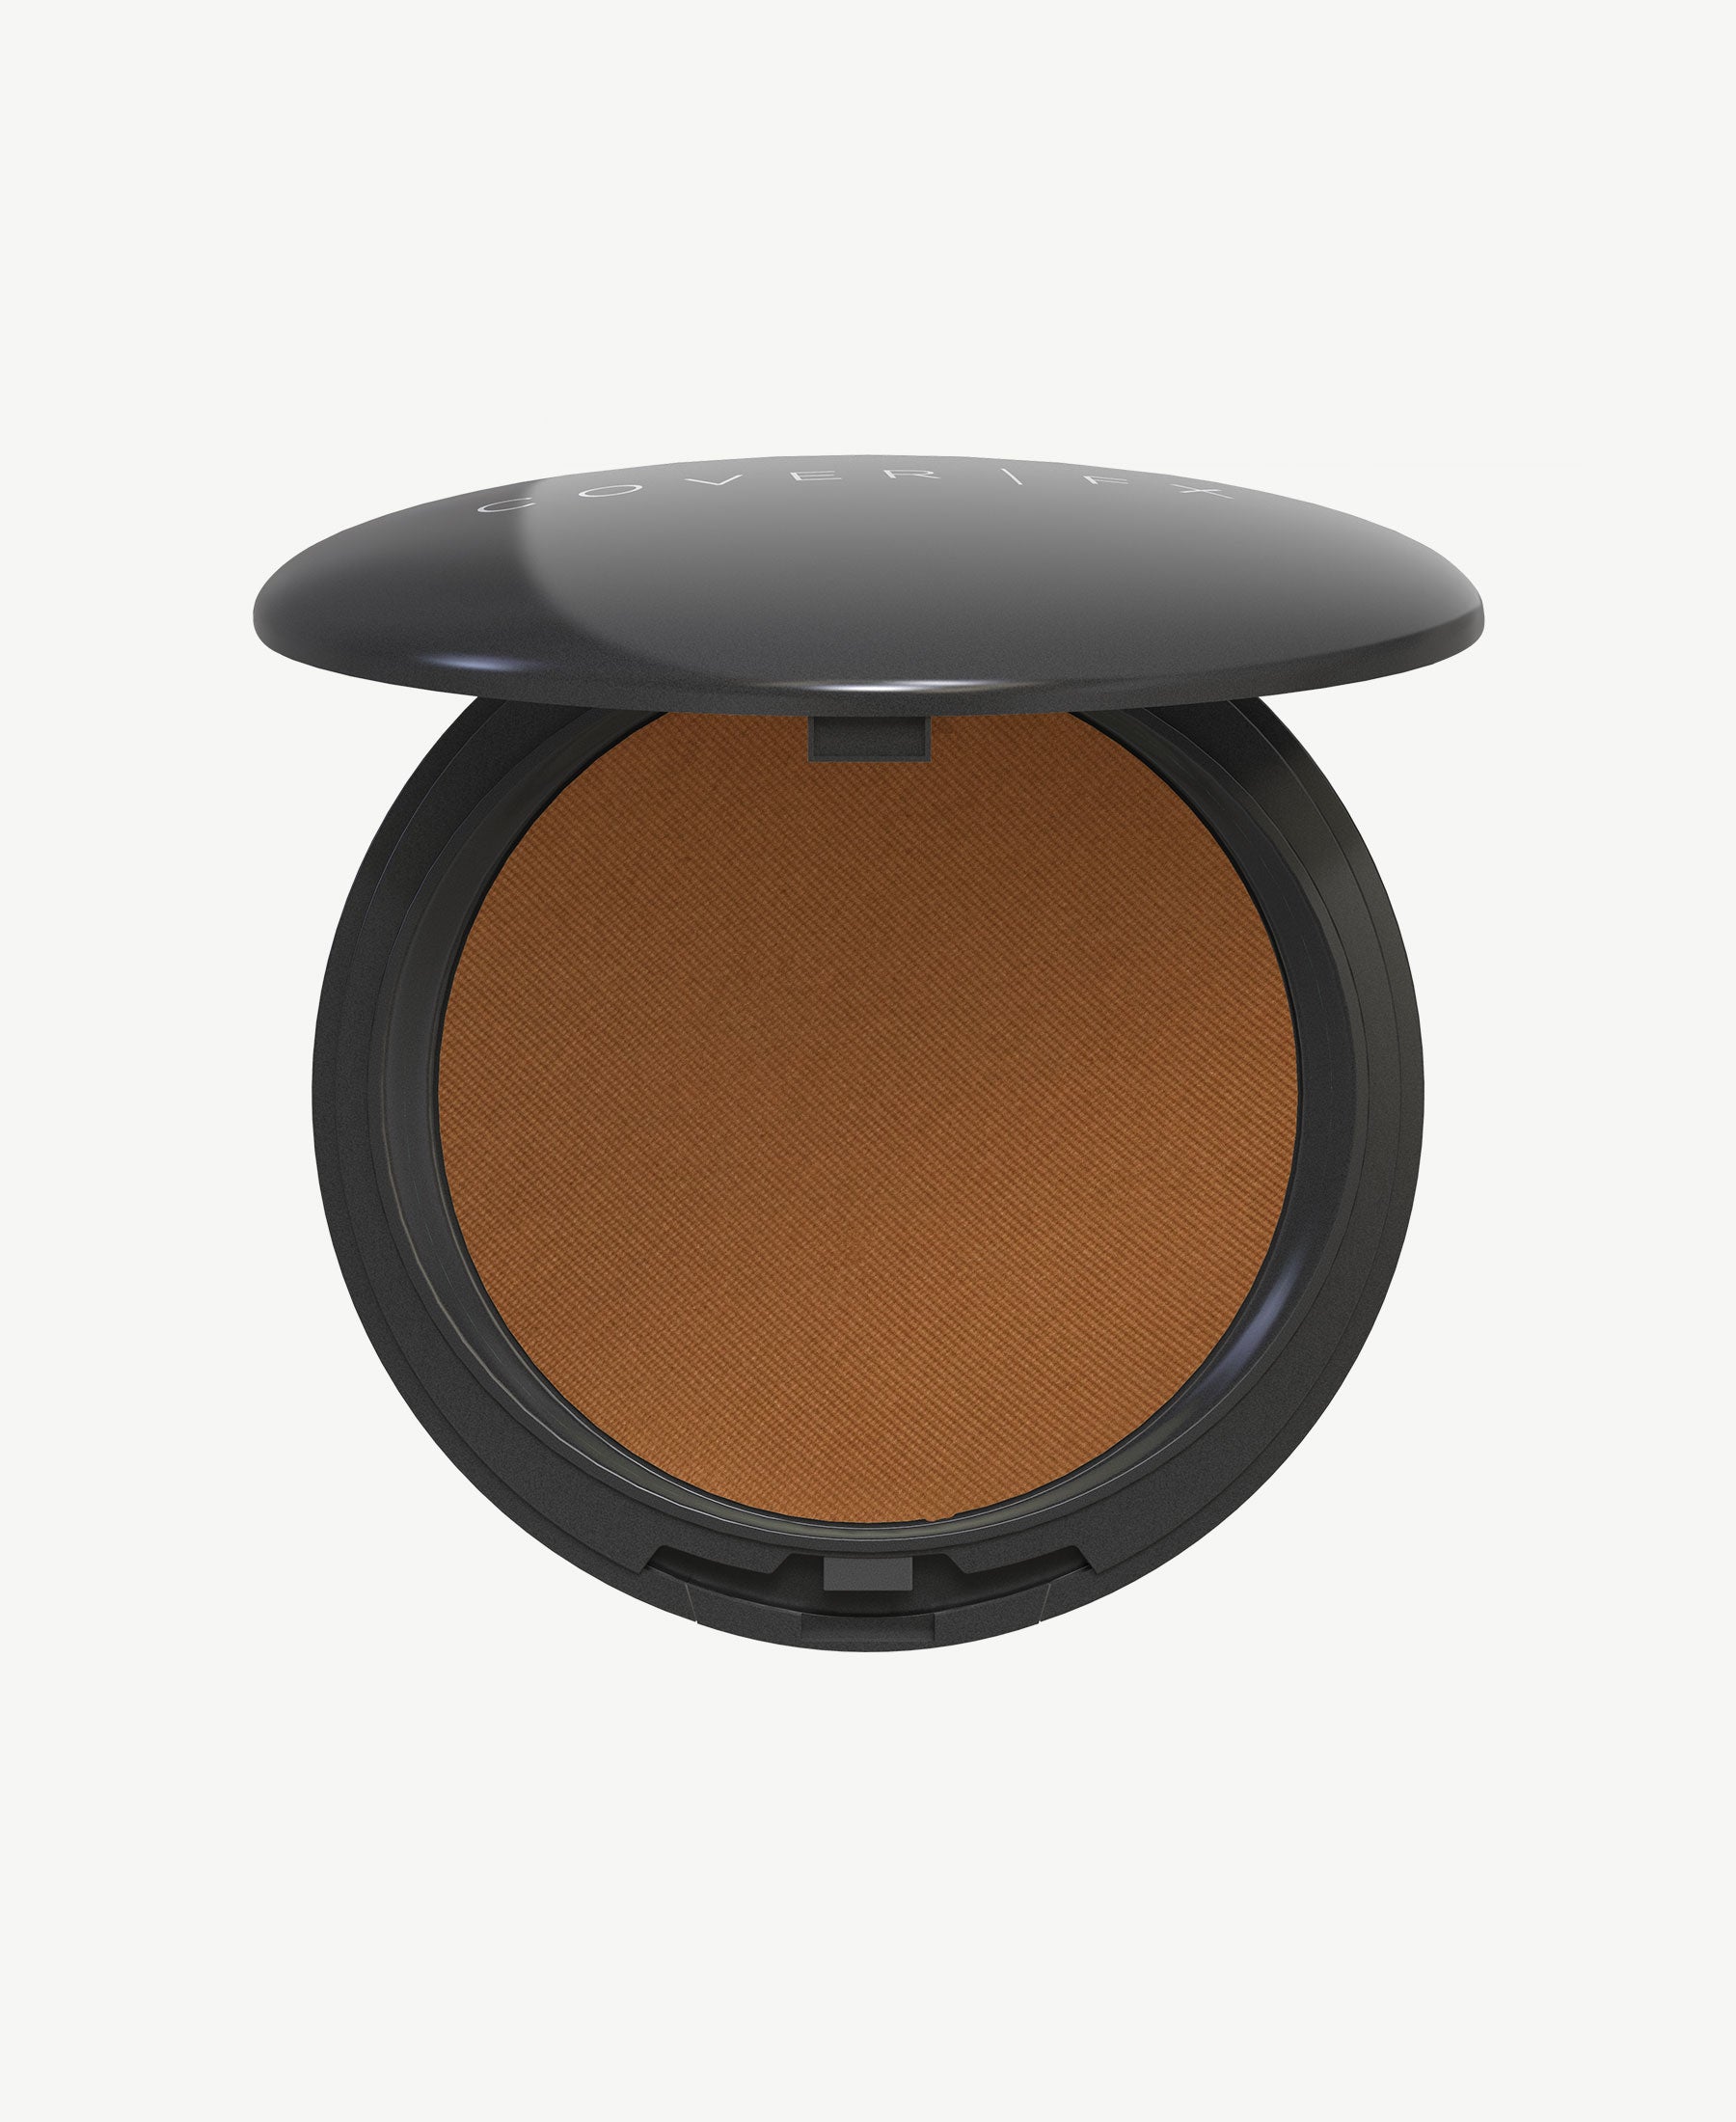 Cover FX Pressed Mineral Foundation